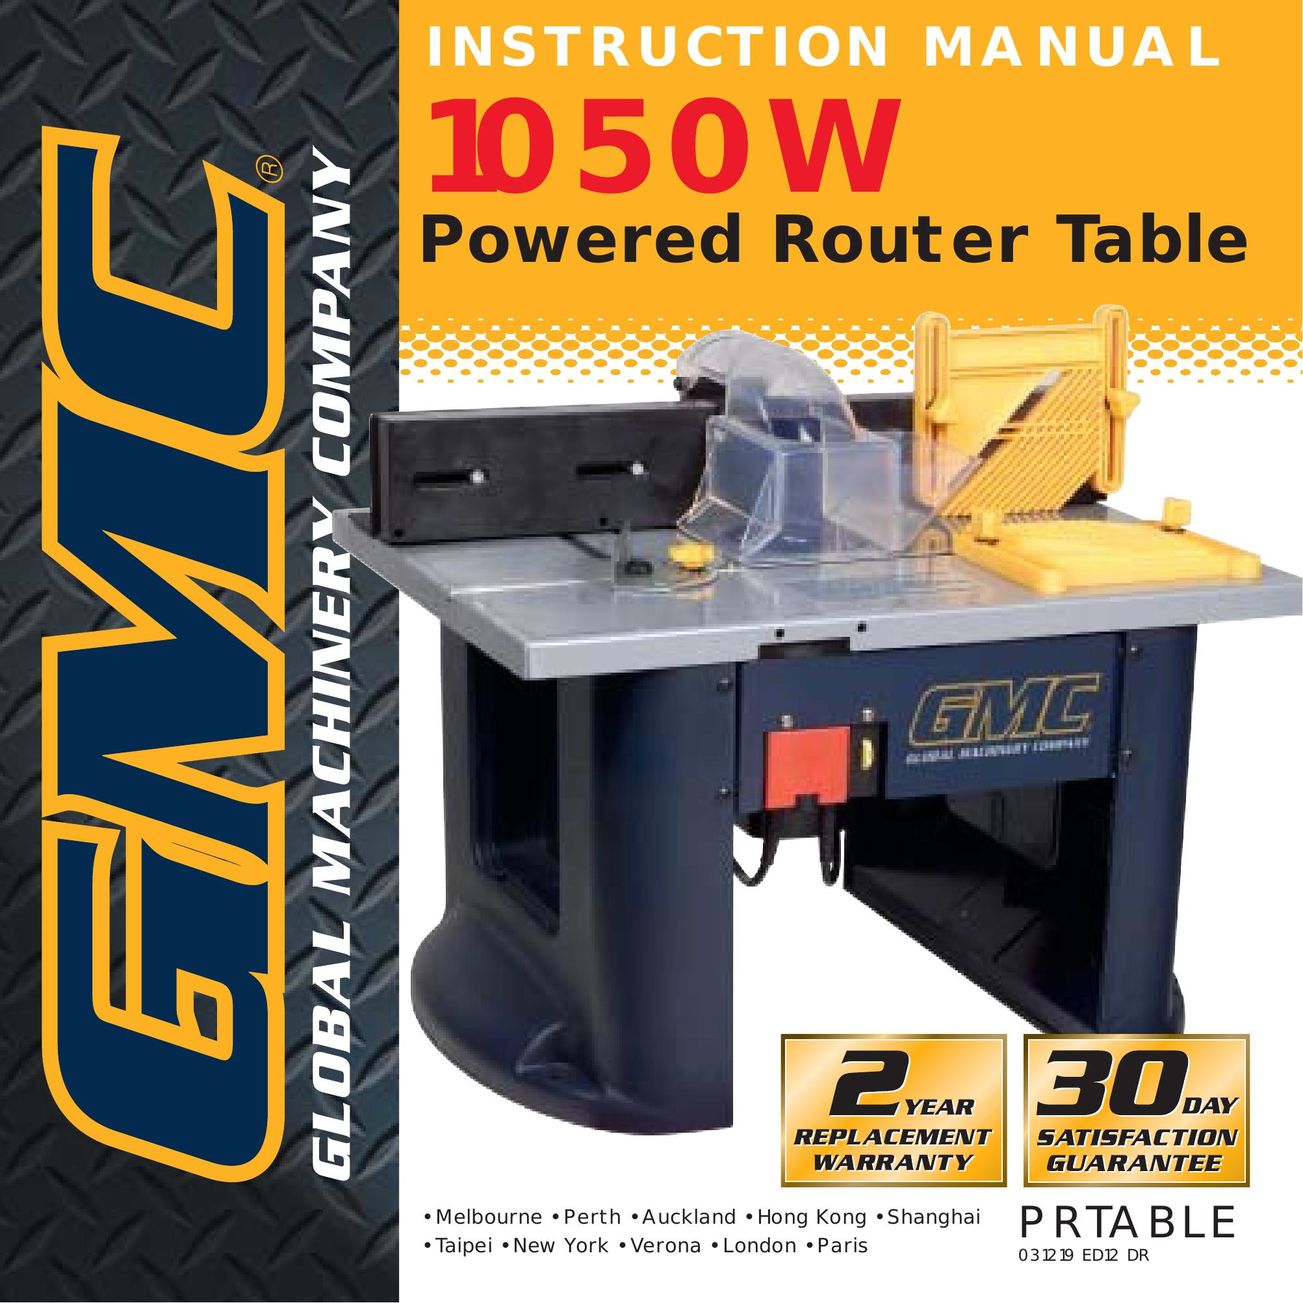 Global Machinery Company 1050W Router User Manual